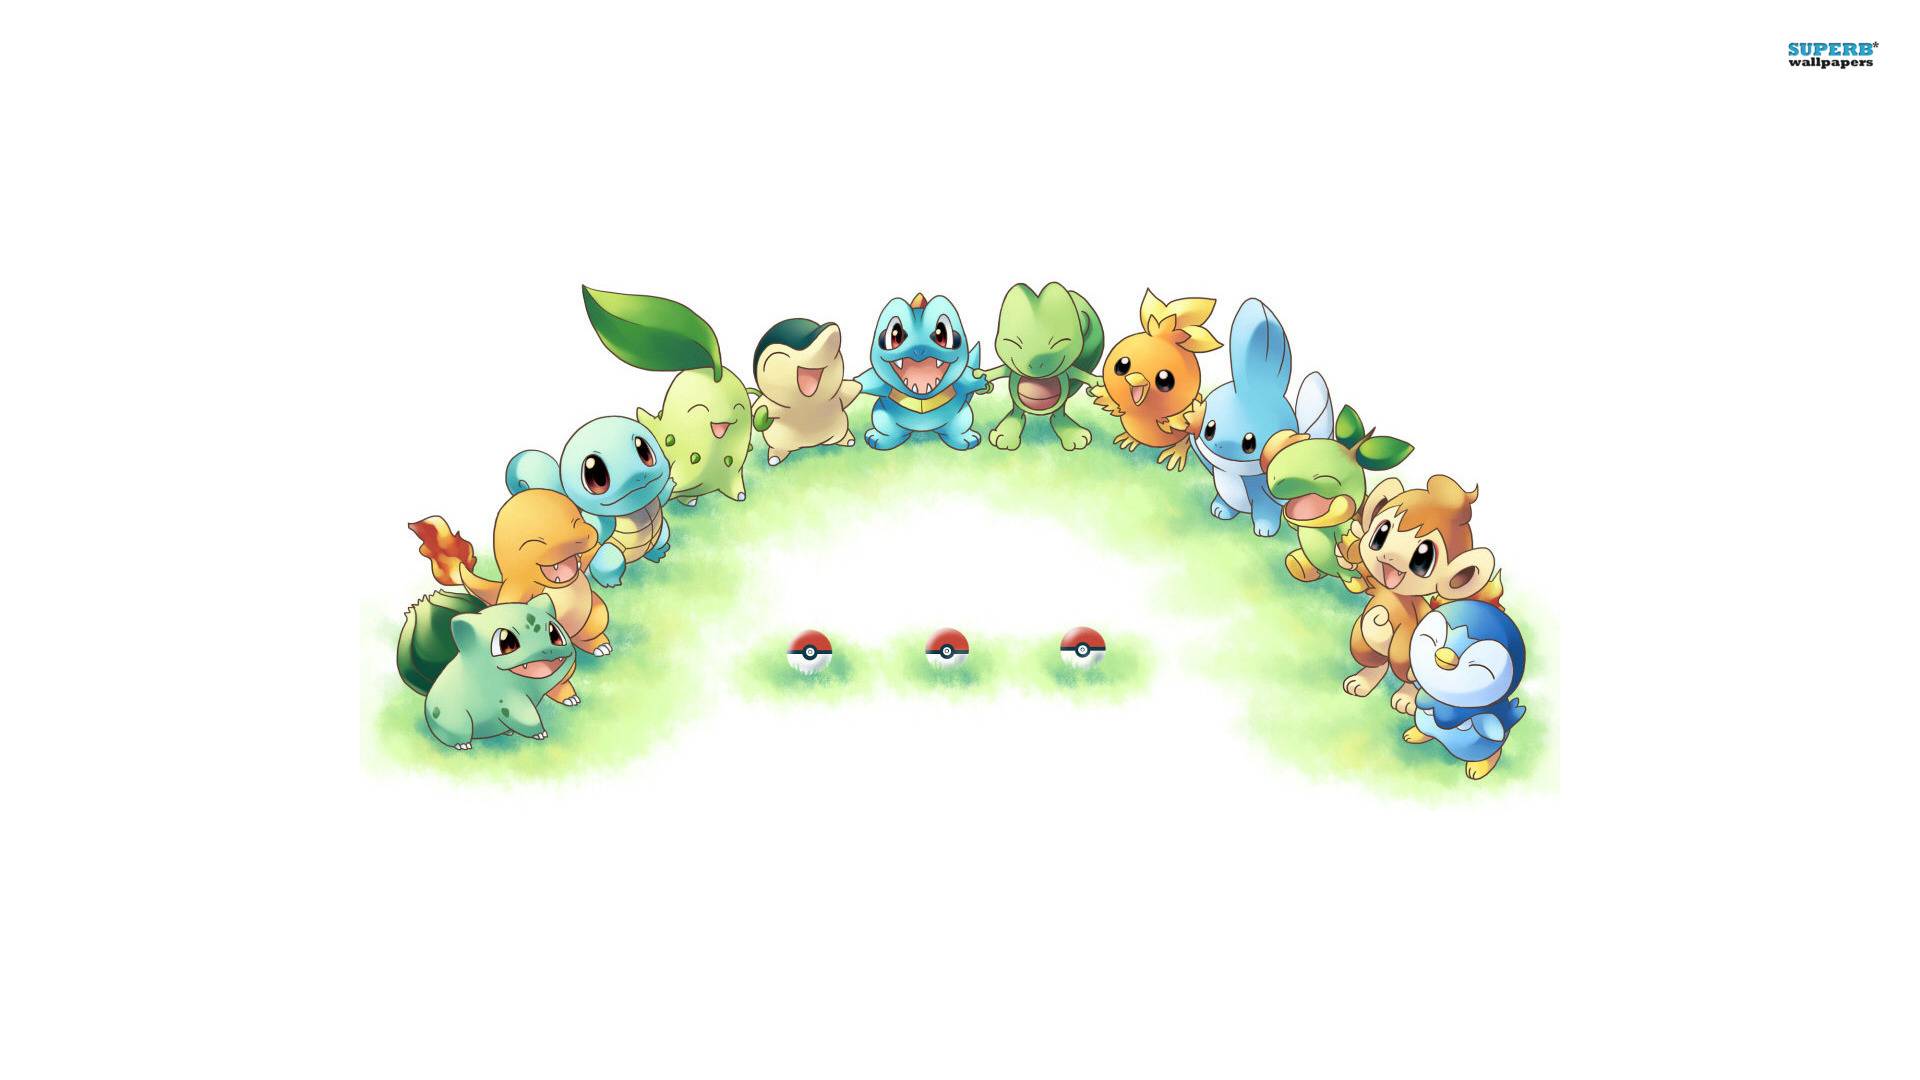 Wallpaper For > Cute Pokemon iPhone Background